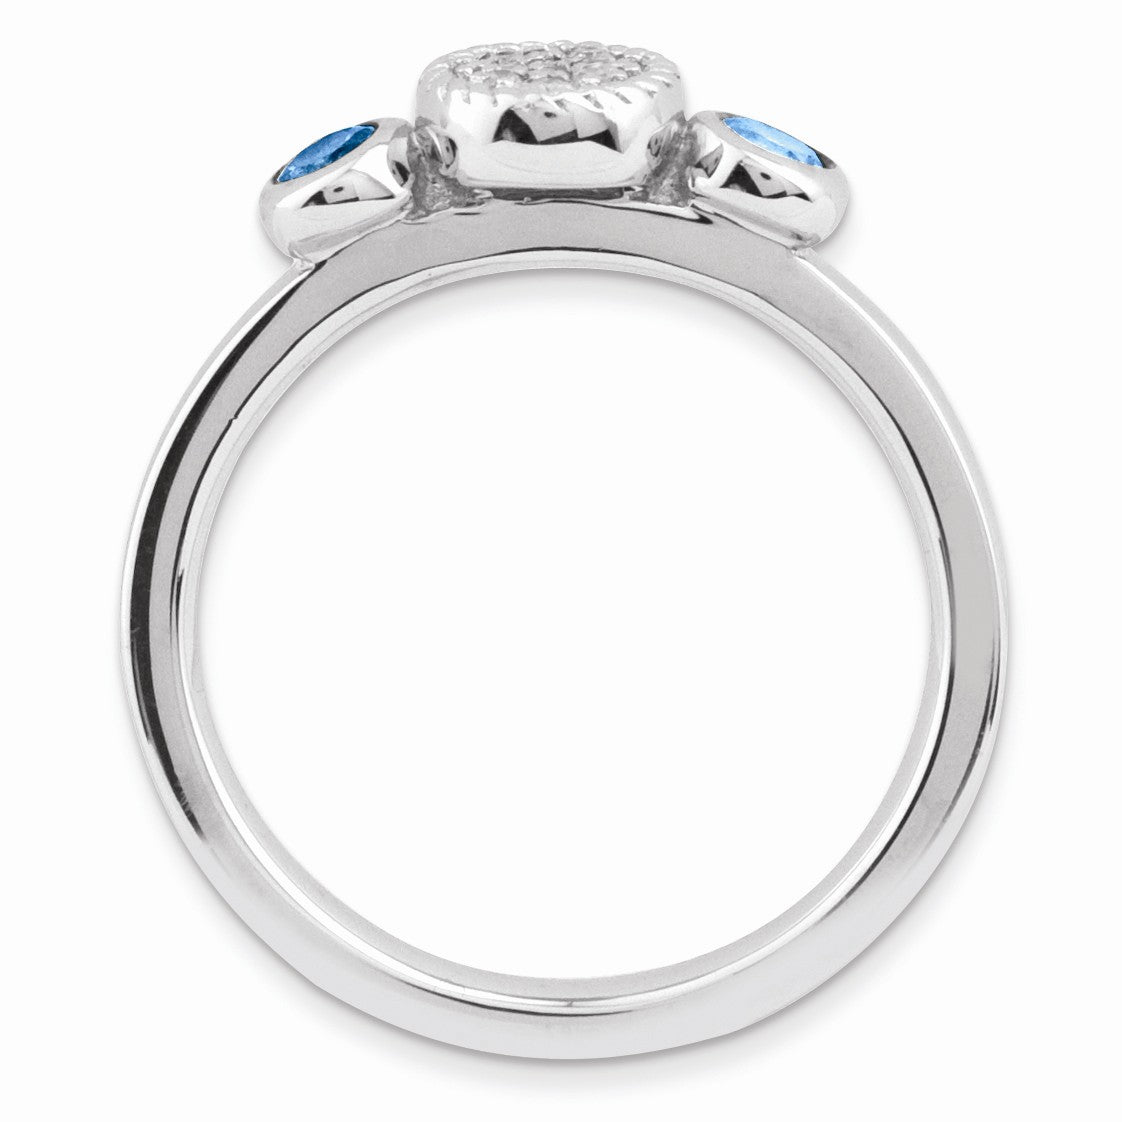 Alternate view of the Sterling Silver Stackable Blue Topaz &amp; .05 Ctw HI/I3 Diamond Ring by The Black Bow Jewelry Co.